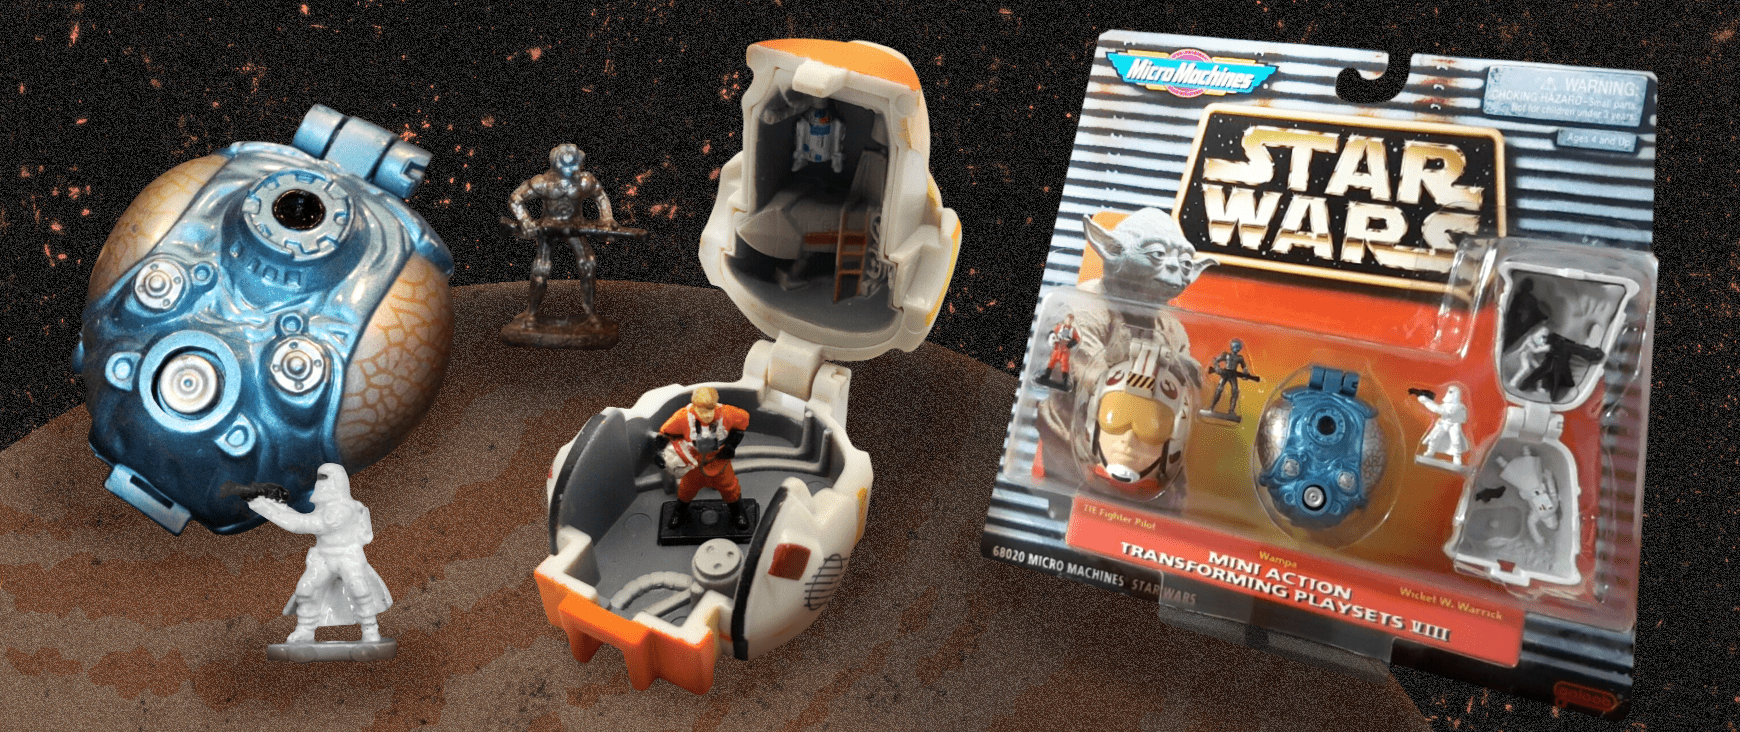 https://www.90stoys.com/app/uploads/2022/11/star-wars-micro-machines-mini-action-transforming-playset-vii-1997.png